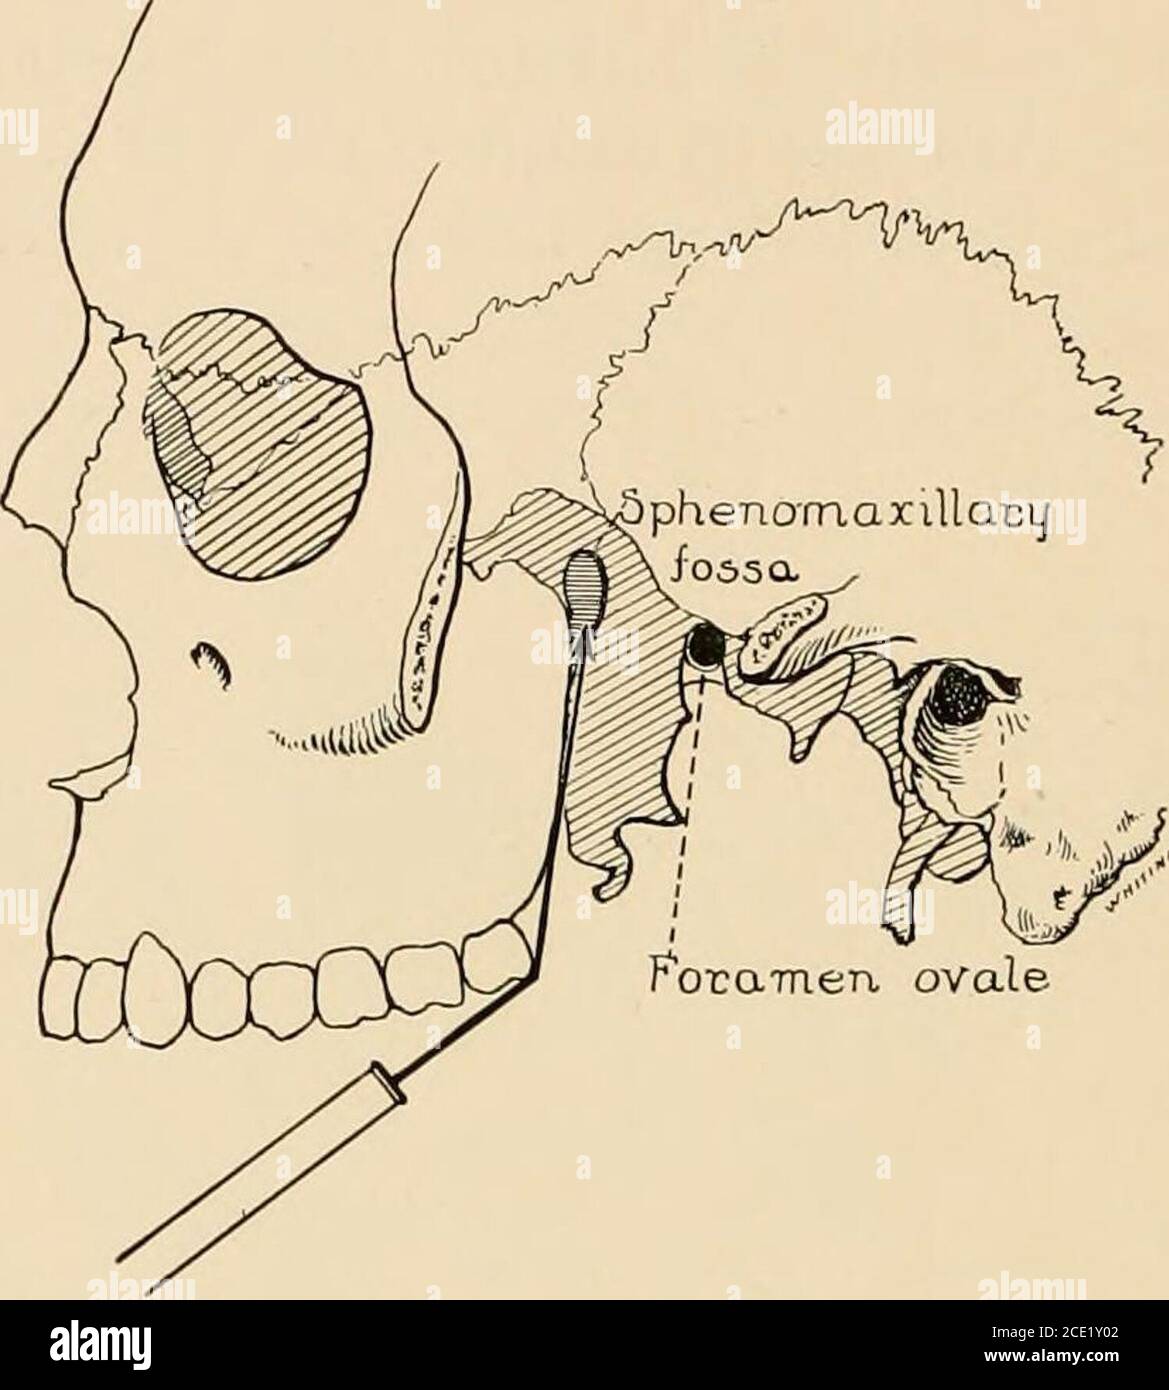 . Regional anesthesia : its technic and clinical application . Fig. 49.—Maxillary block by the oral route (1). Direction of needle (a) in relationto skeleton. maxilla and the pterygoid process and at a depth of from 3.5 to4 cm. reaches the sphenomaxillary fossa, where 2 c.c. of the 2 per cent,solution are injected slowly. Paresthesias obtained in the territory of the palatine nerves indi-cate that the point of the needle is in the correct direction. Injectionmay then be started while the needle is advanced about 0.5 cm. further,in the same direction, toward the maxUlary nerve. The palatine gan Stock Photo